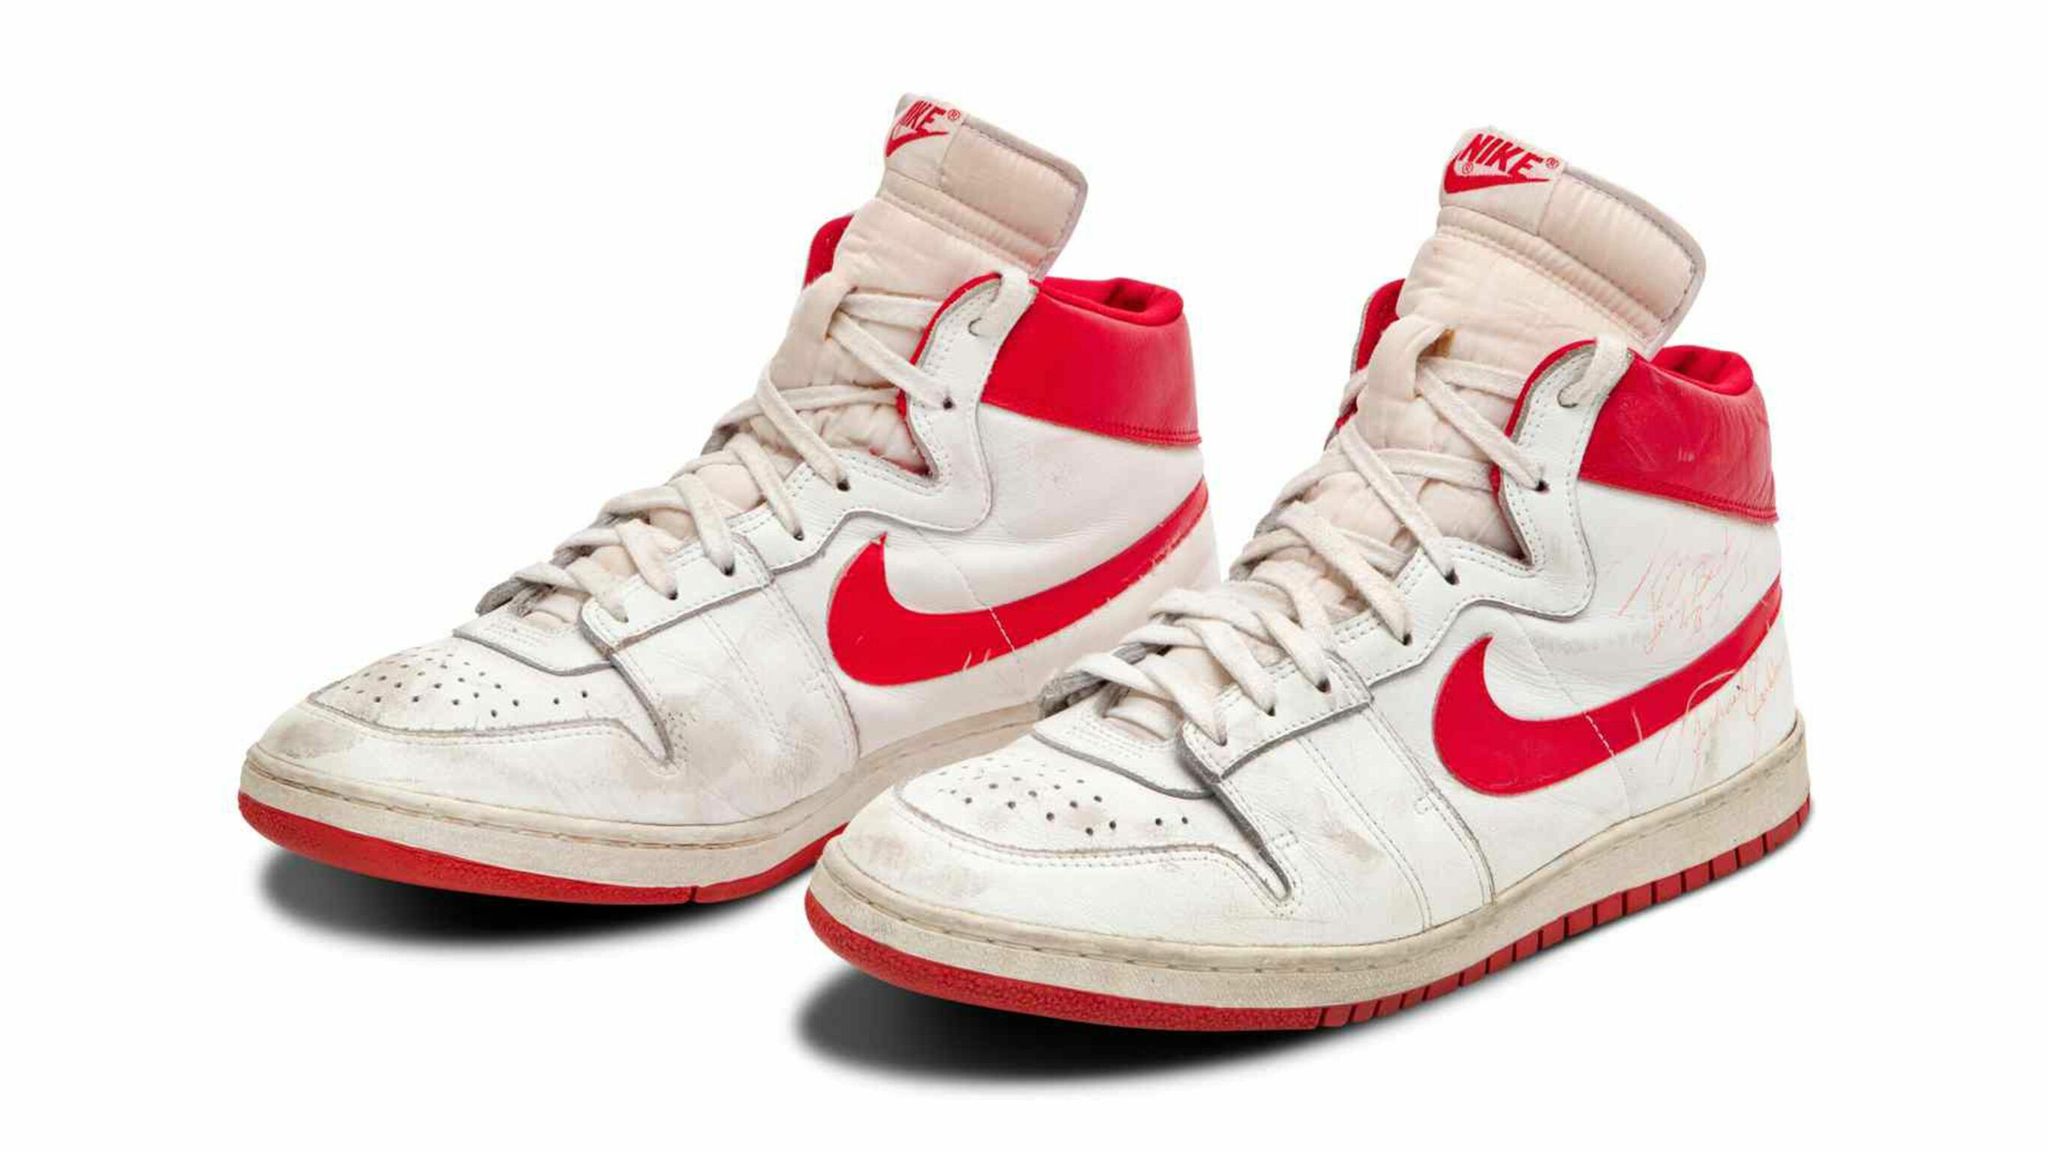 Michael Jordan's 1984 Nike Air Ship trainers break records after selling  for $1.42m | Ents \u0026 Arts News | Sky News